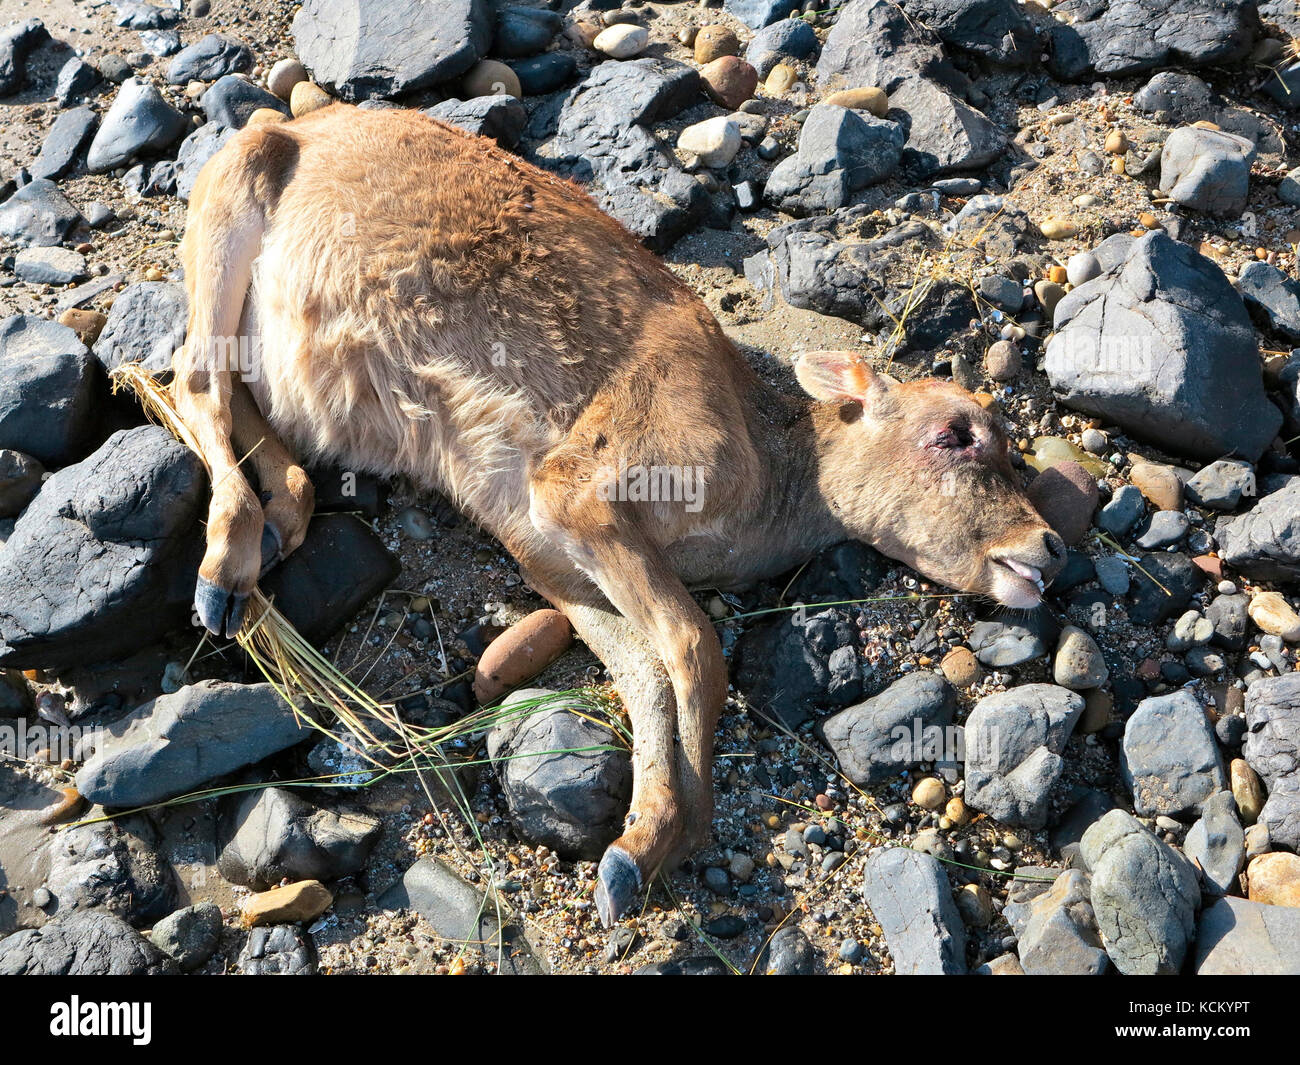 Young calf washed up on shore after being carried away by flood waters. Devonport, Tasmania, Australia Stock Photo